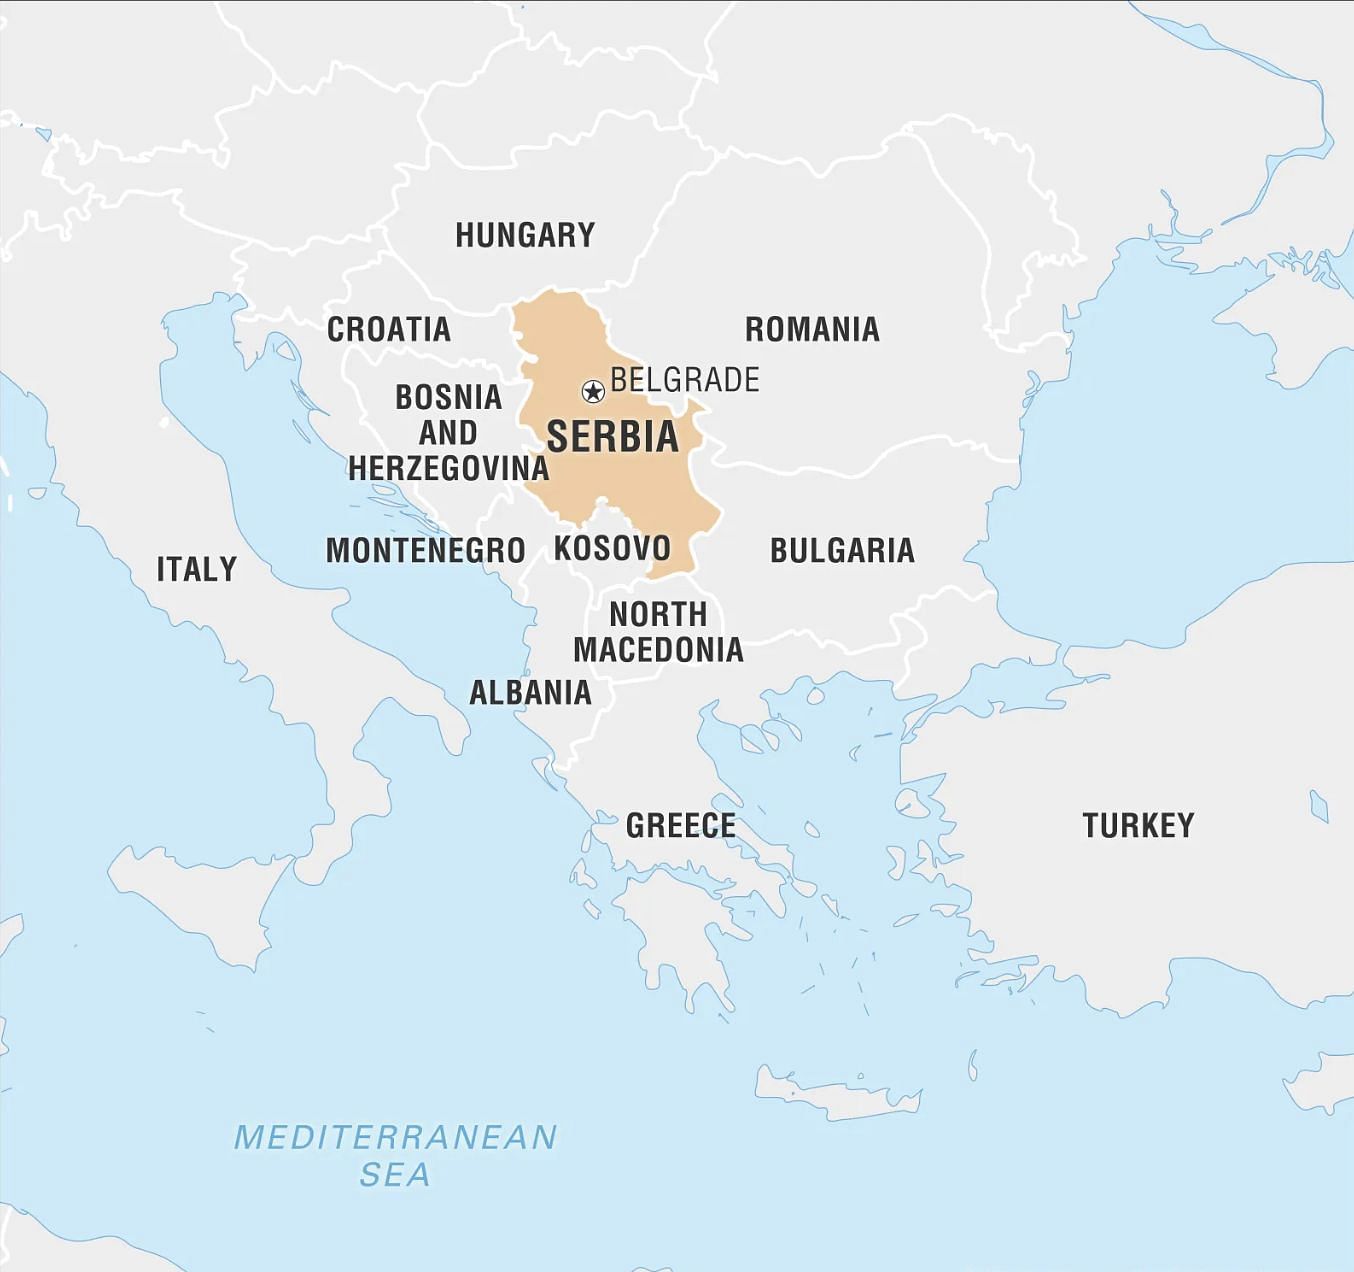 Serbia shown on the world map